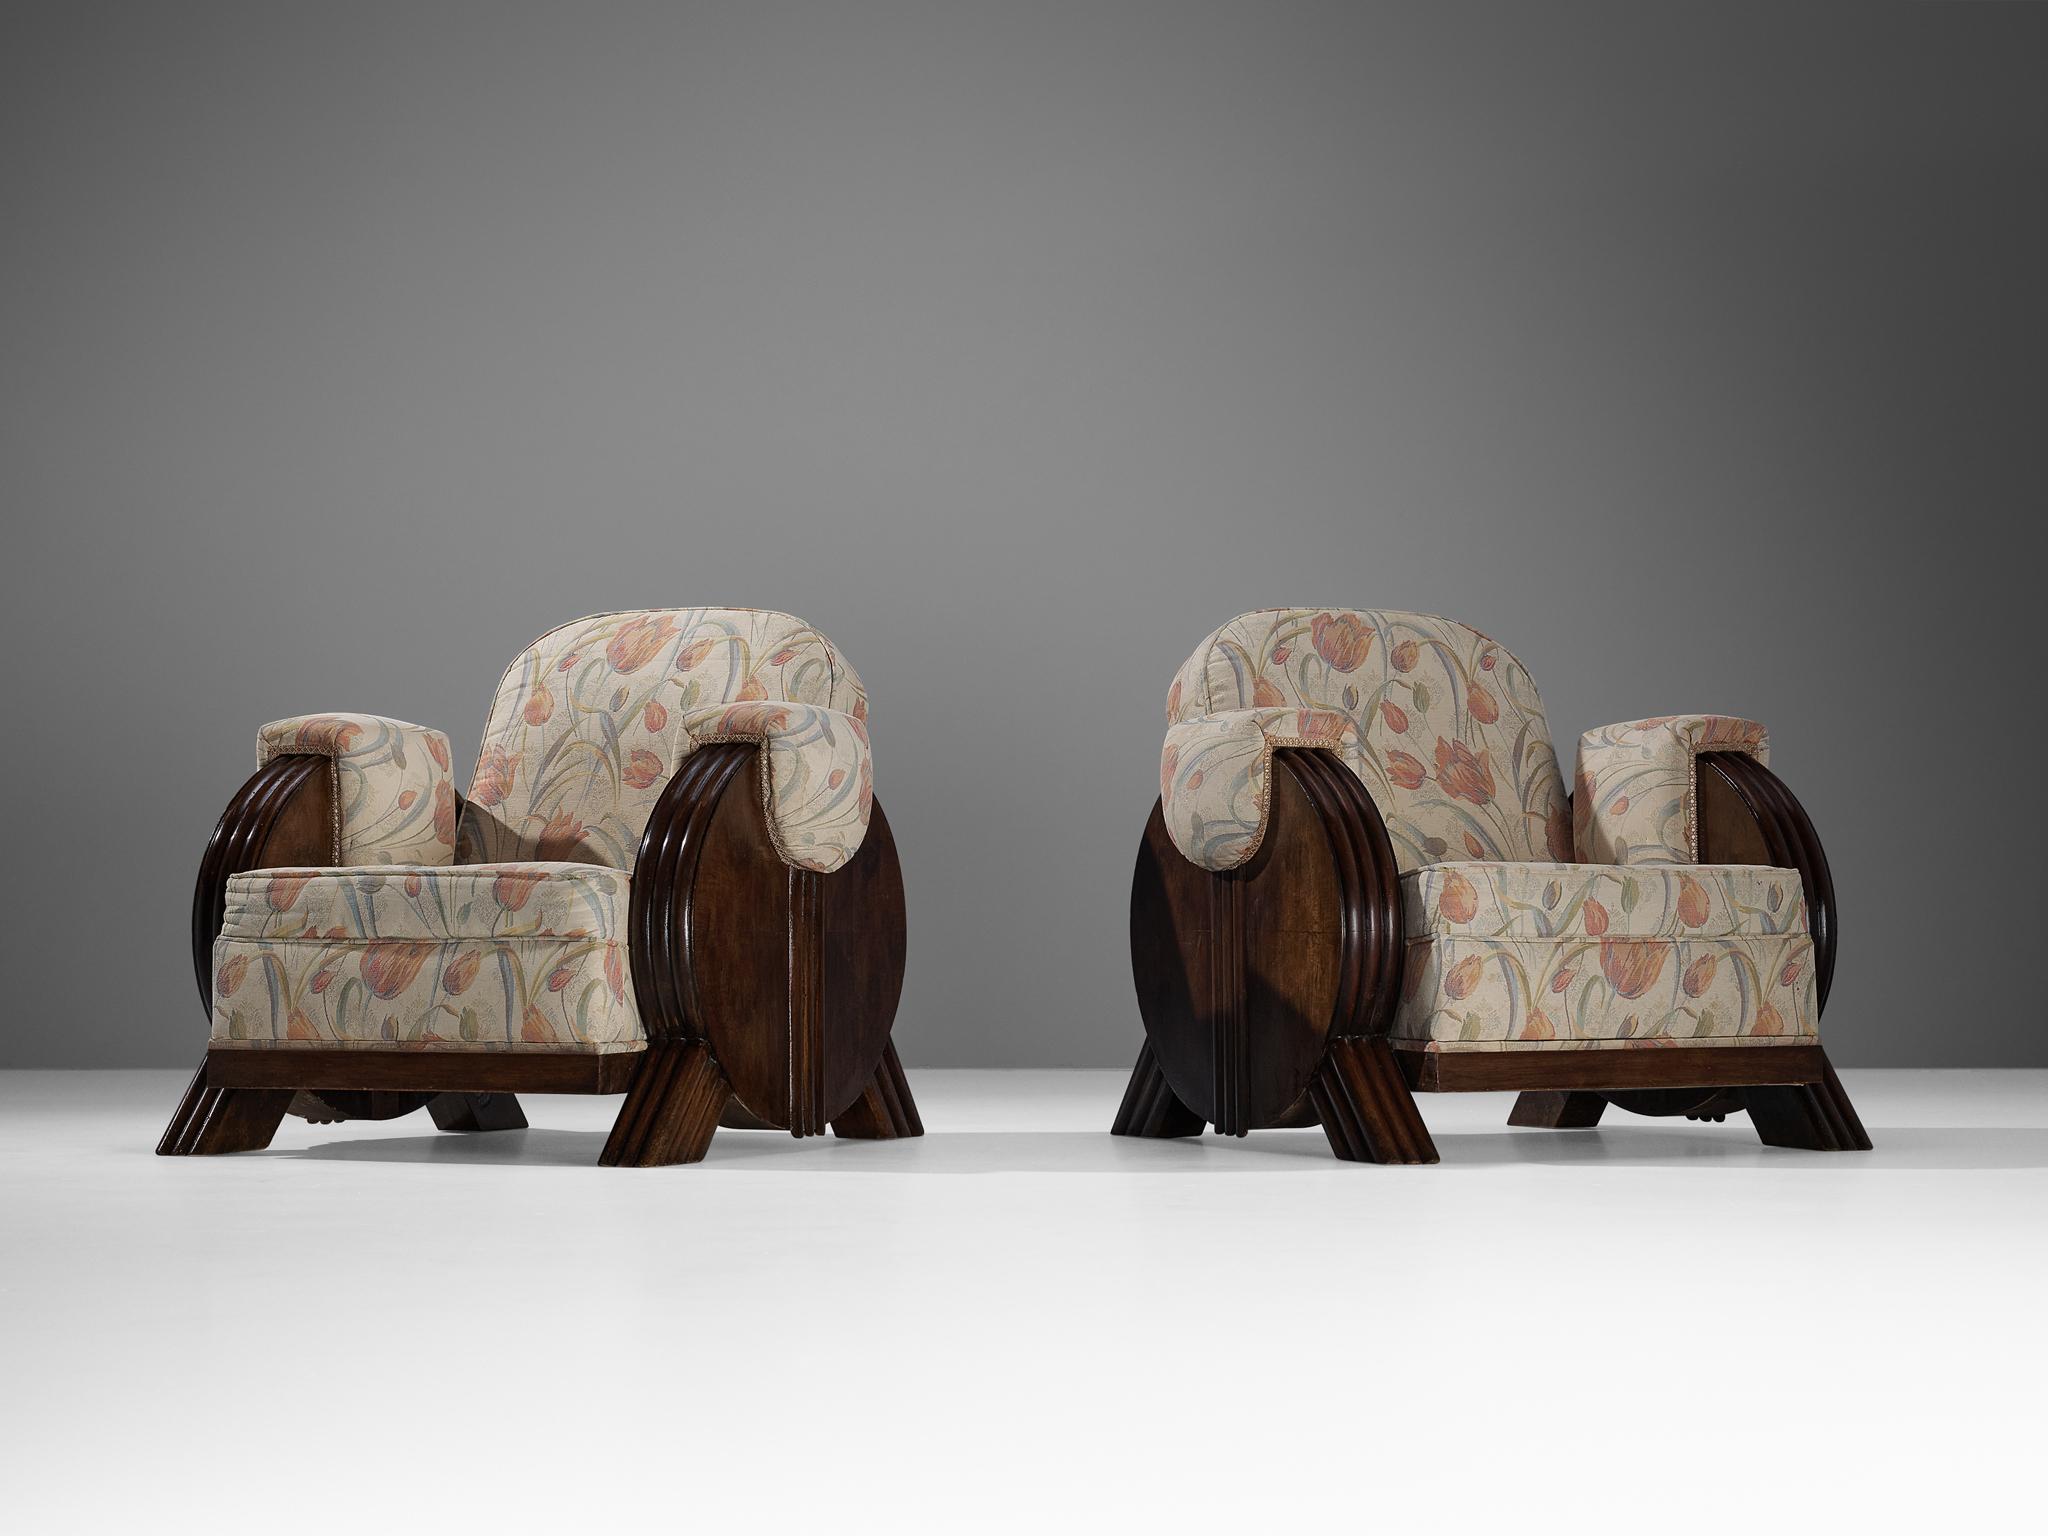 Pair of easy chairs, fabric, stained beech, brass, Europe, 1940s.

These armchairs exude the Art Deco style of the 1940s. With its imposing shapes, this design deserves a prominent place in one's interior. Truly exceptional about this piece are